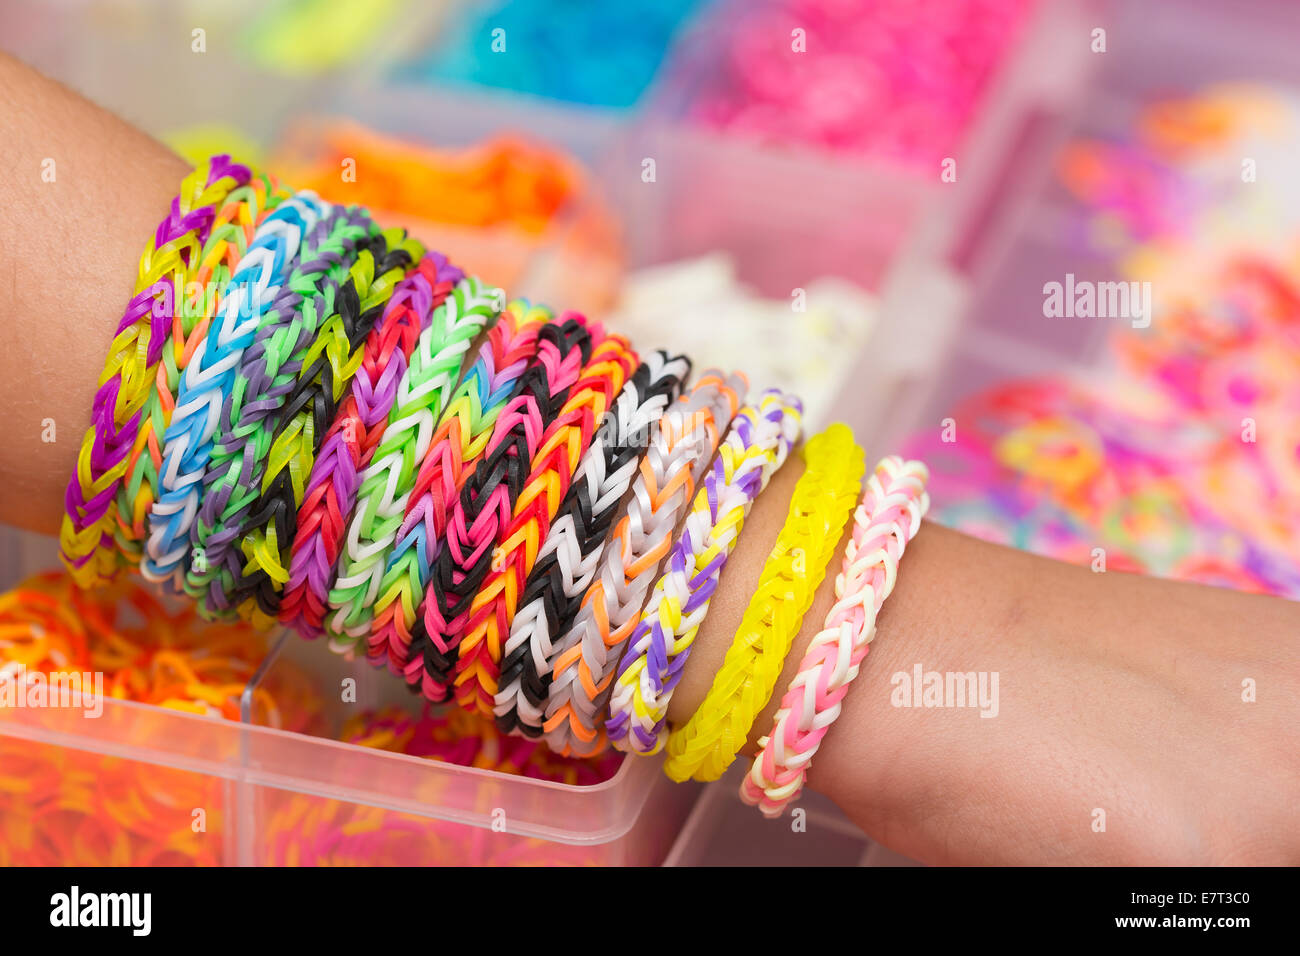 Colorful Rainbow loom rubber bands in a box Stock Photo - Alamy